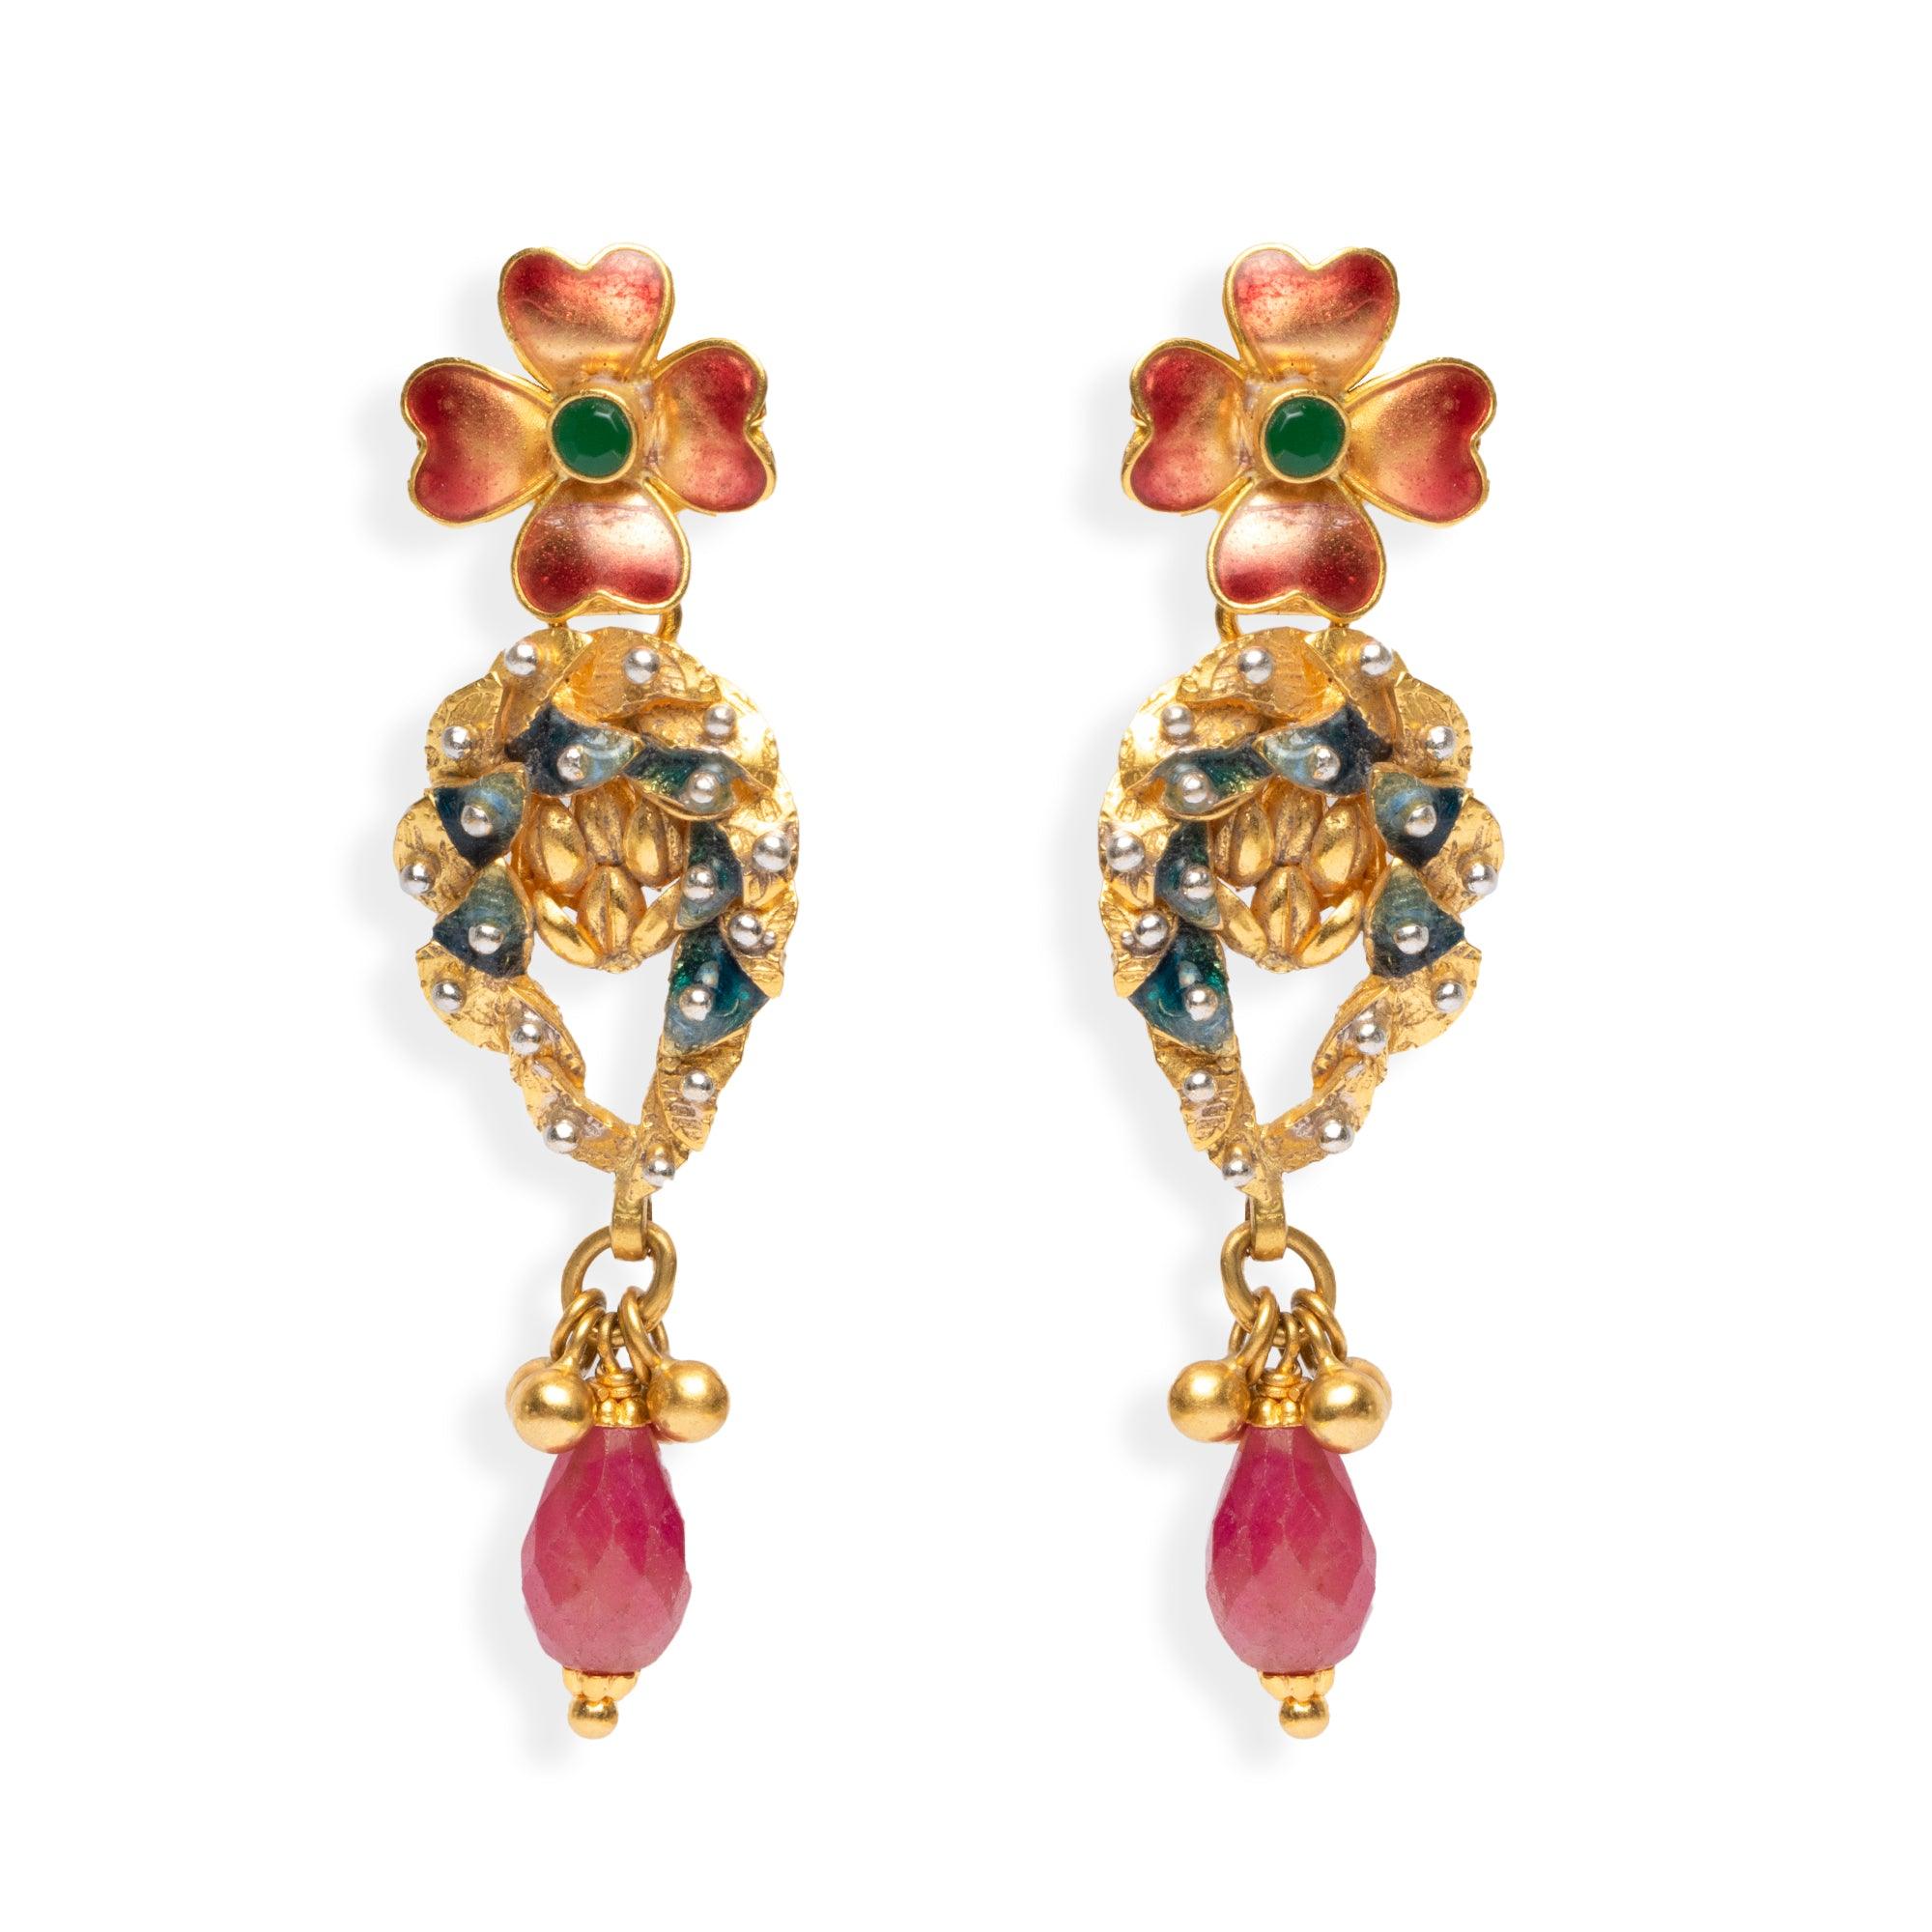 22ct Gold Enamel and Cubic Zirconia Drop Earrings with Flower Design (10.4g) E-3350